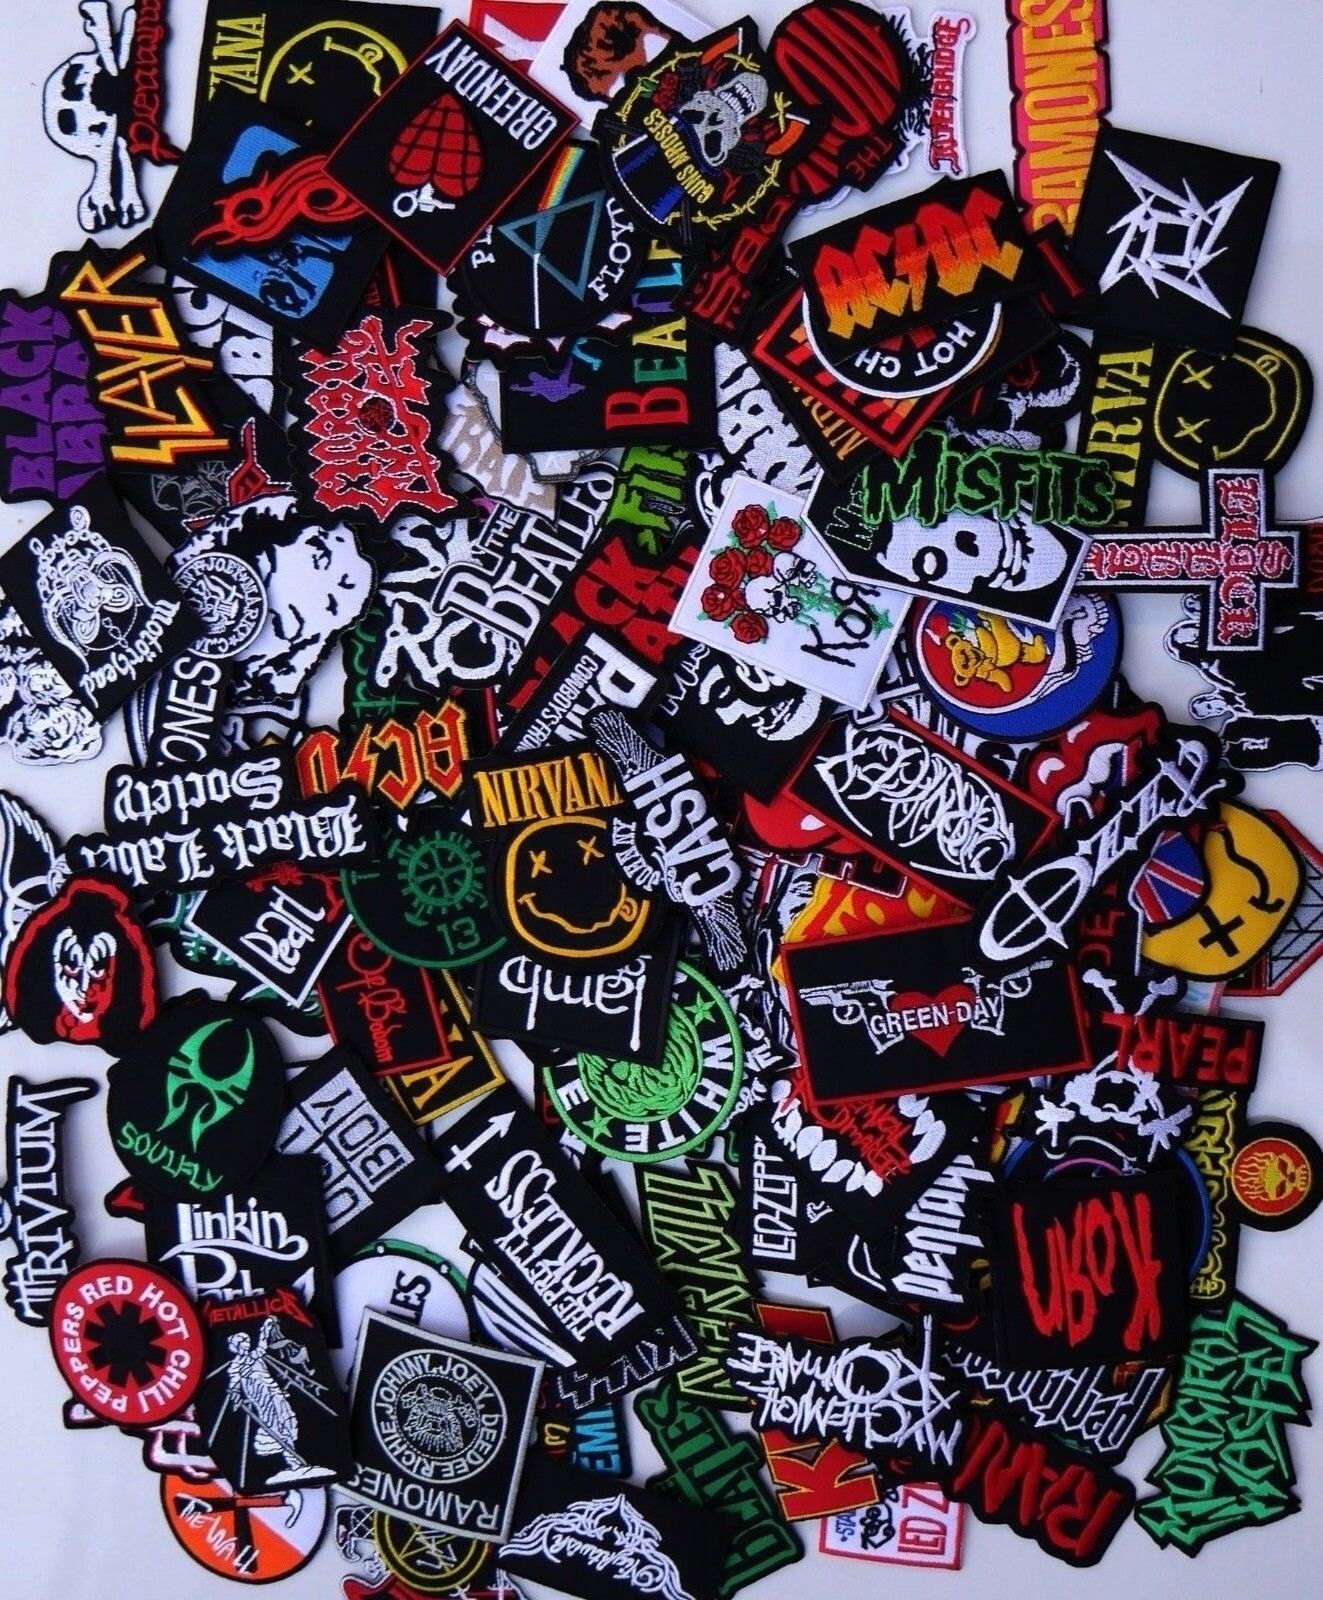 Random Lot of 40 Rock Band Patches Iron on Music Punk Roll Heavy Metal Sew DIY Unbranded Does Not Apply